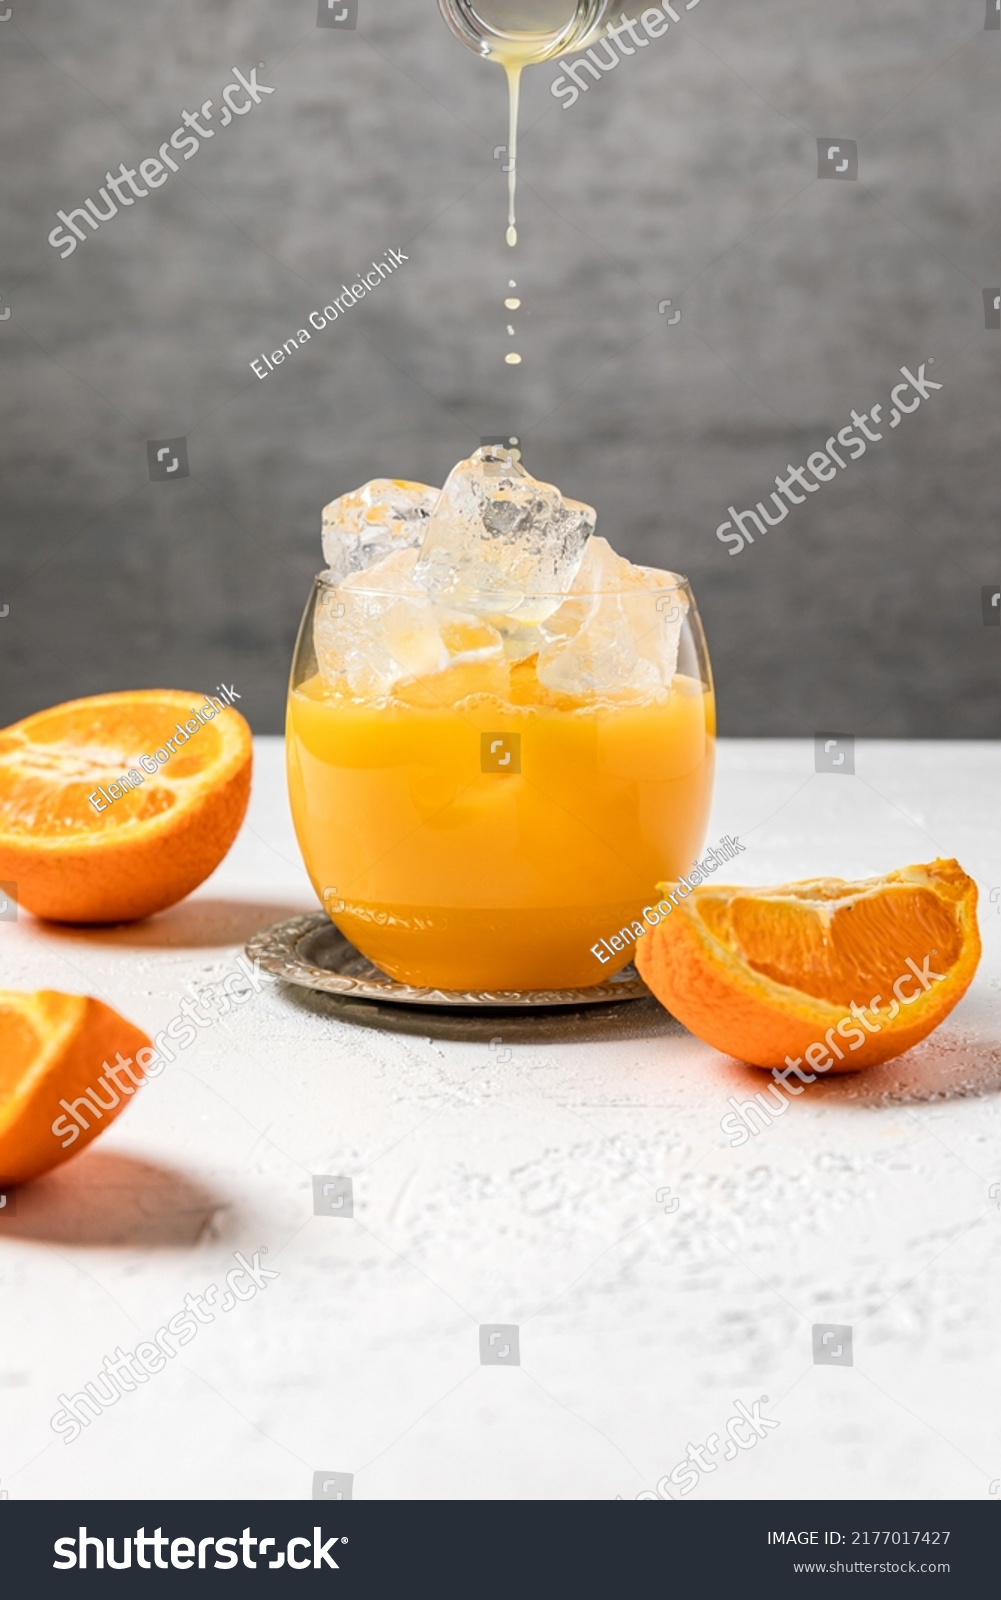 Bumble cold refreshing coffee drink with freshly squeezed orange juice, espresso and ice in the making. Pouring orange juice into the glass. #2177017427